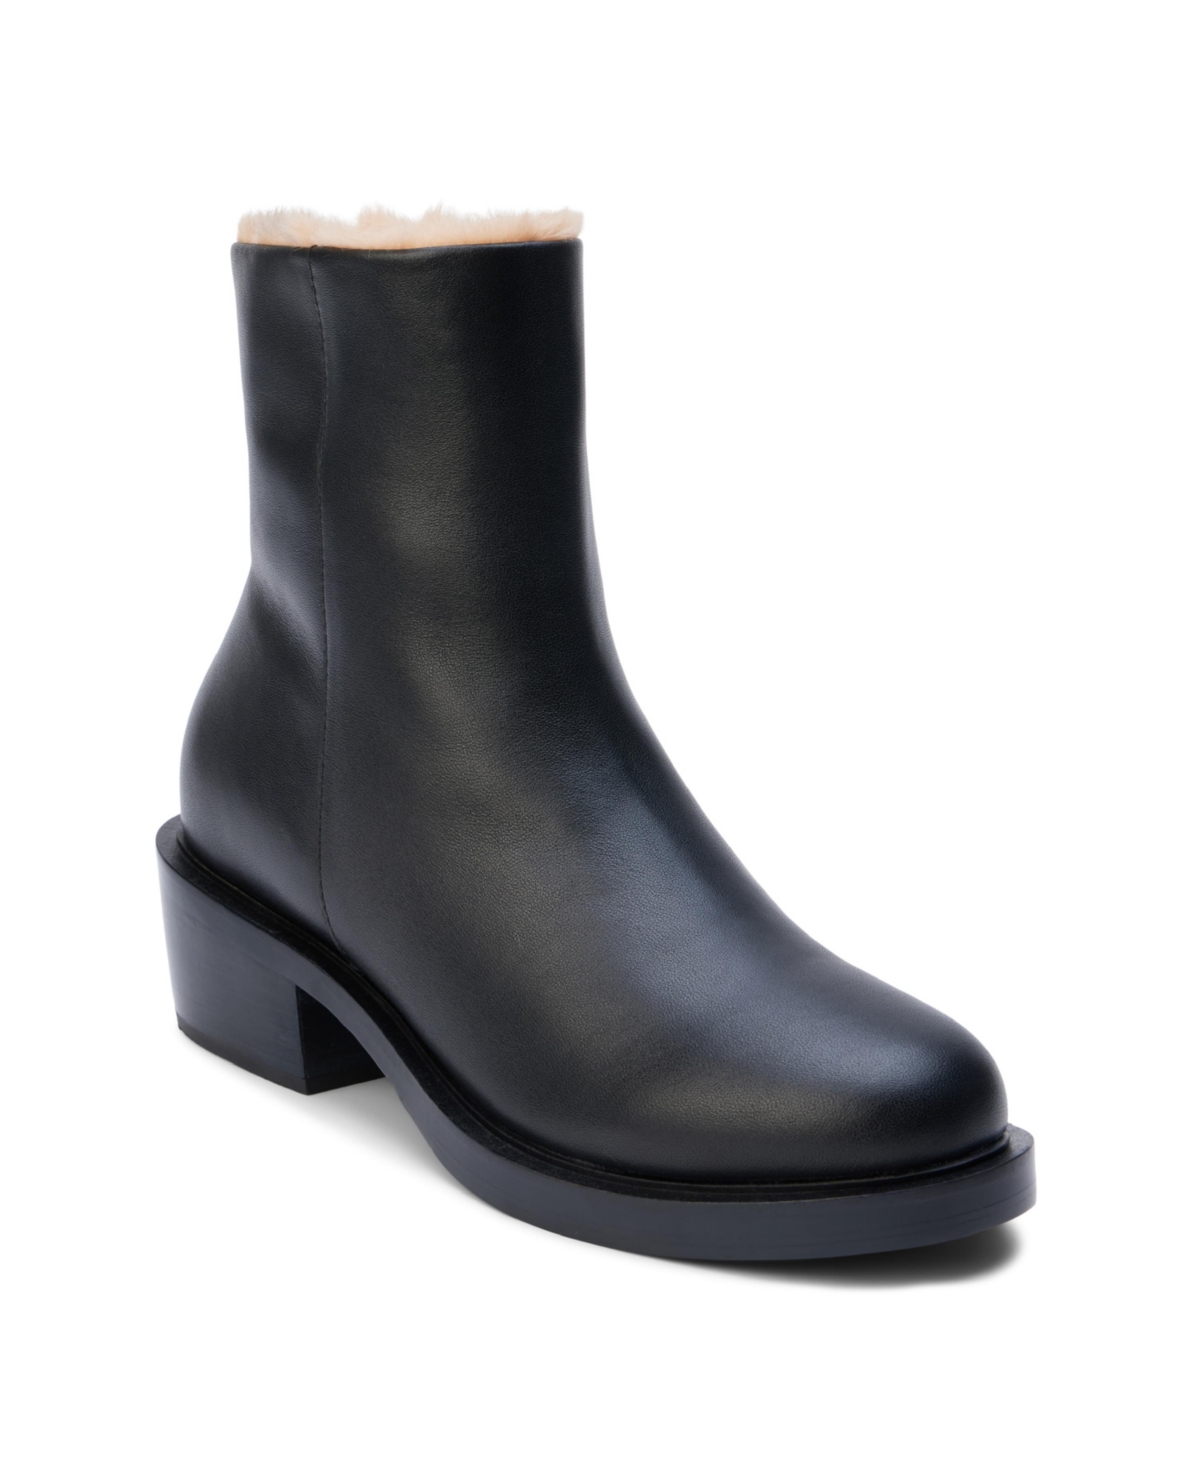 Nate Womens Ankle Boots - Black